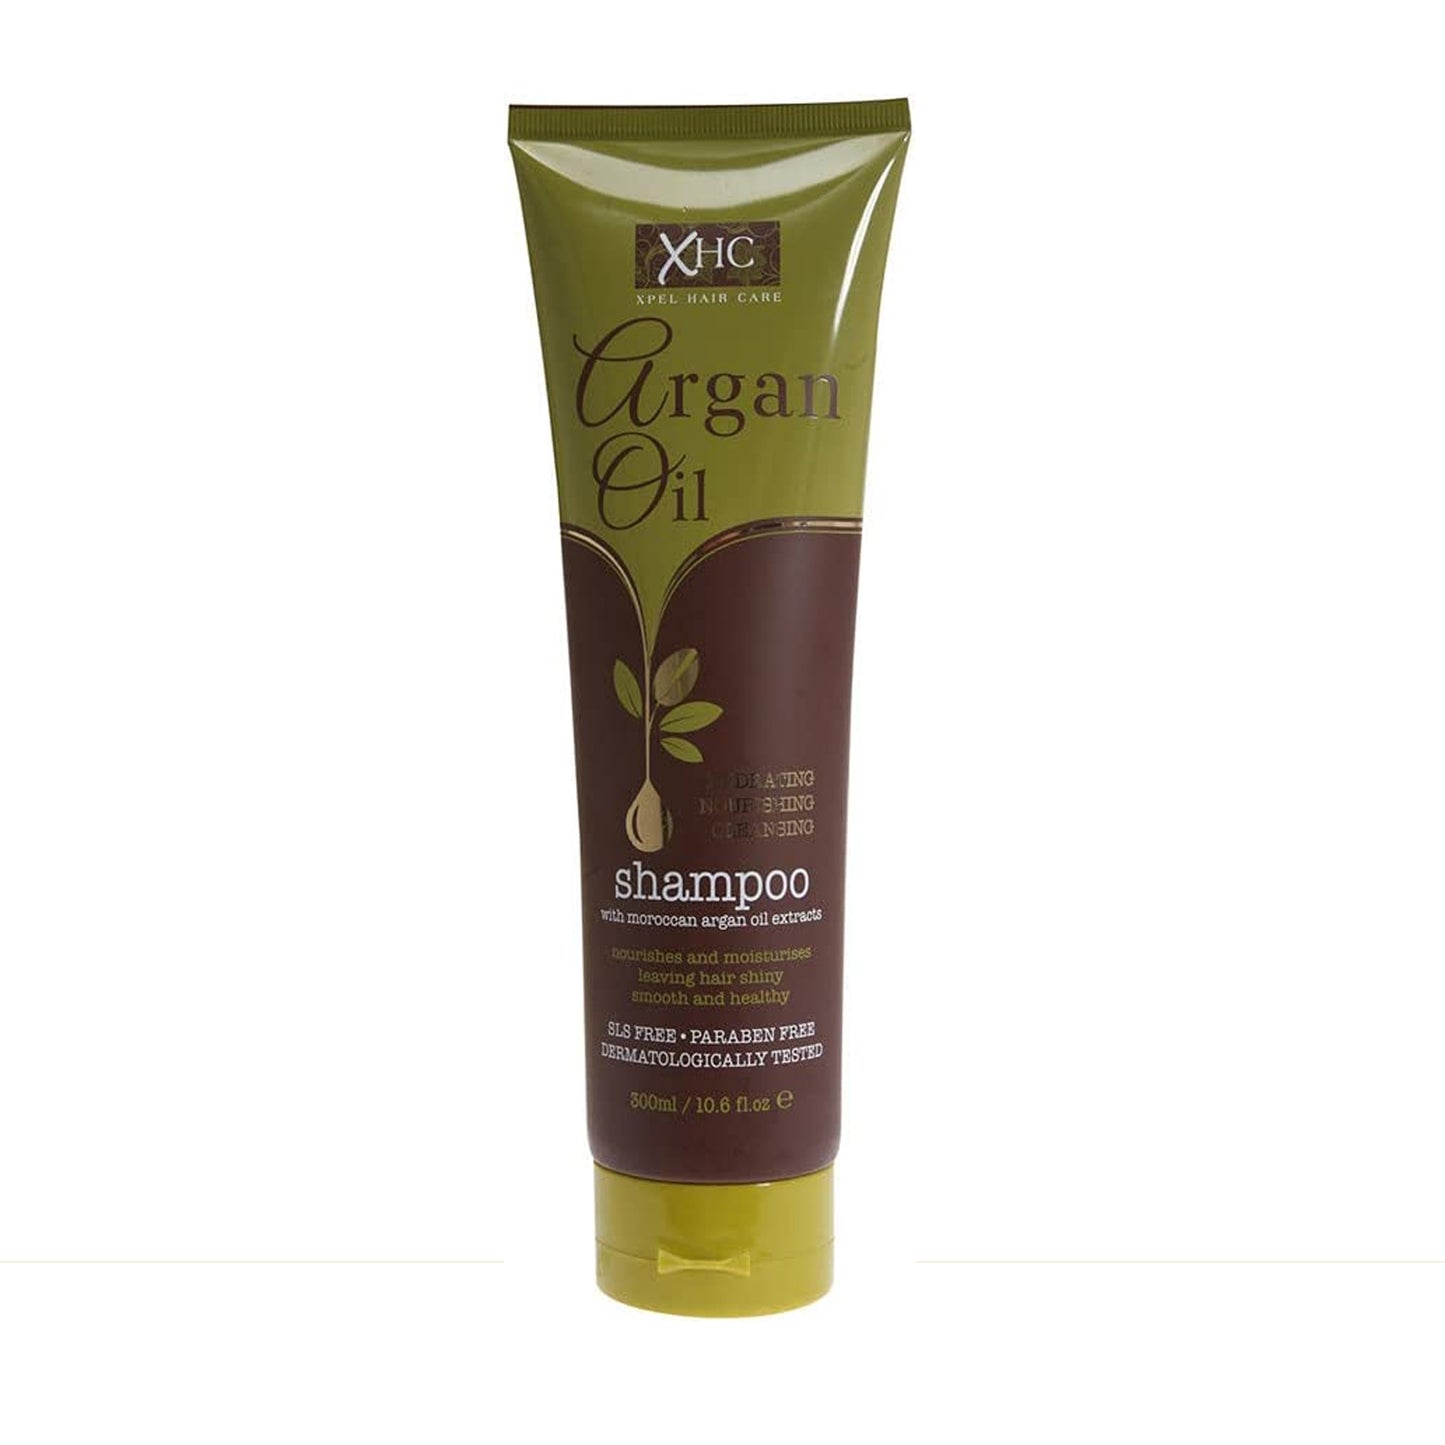 XPEL HAIR CARE - ARGAN OIL SHAMPOO WITH MOROCCAN ARGAN OIL EXTRACTS - 300ML